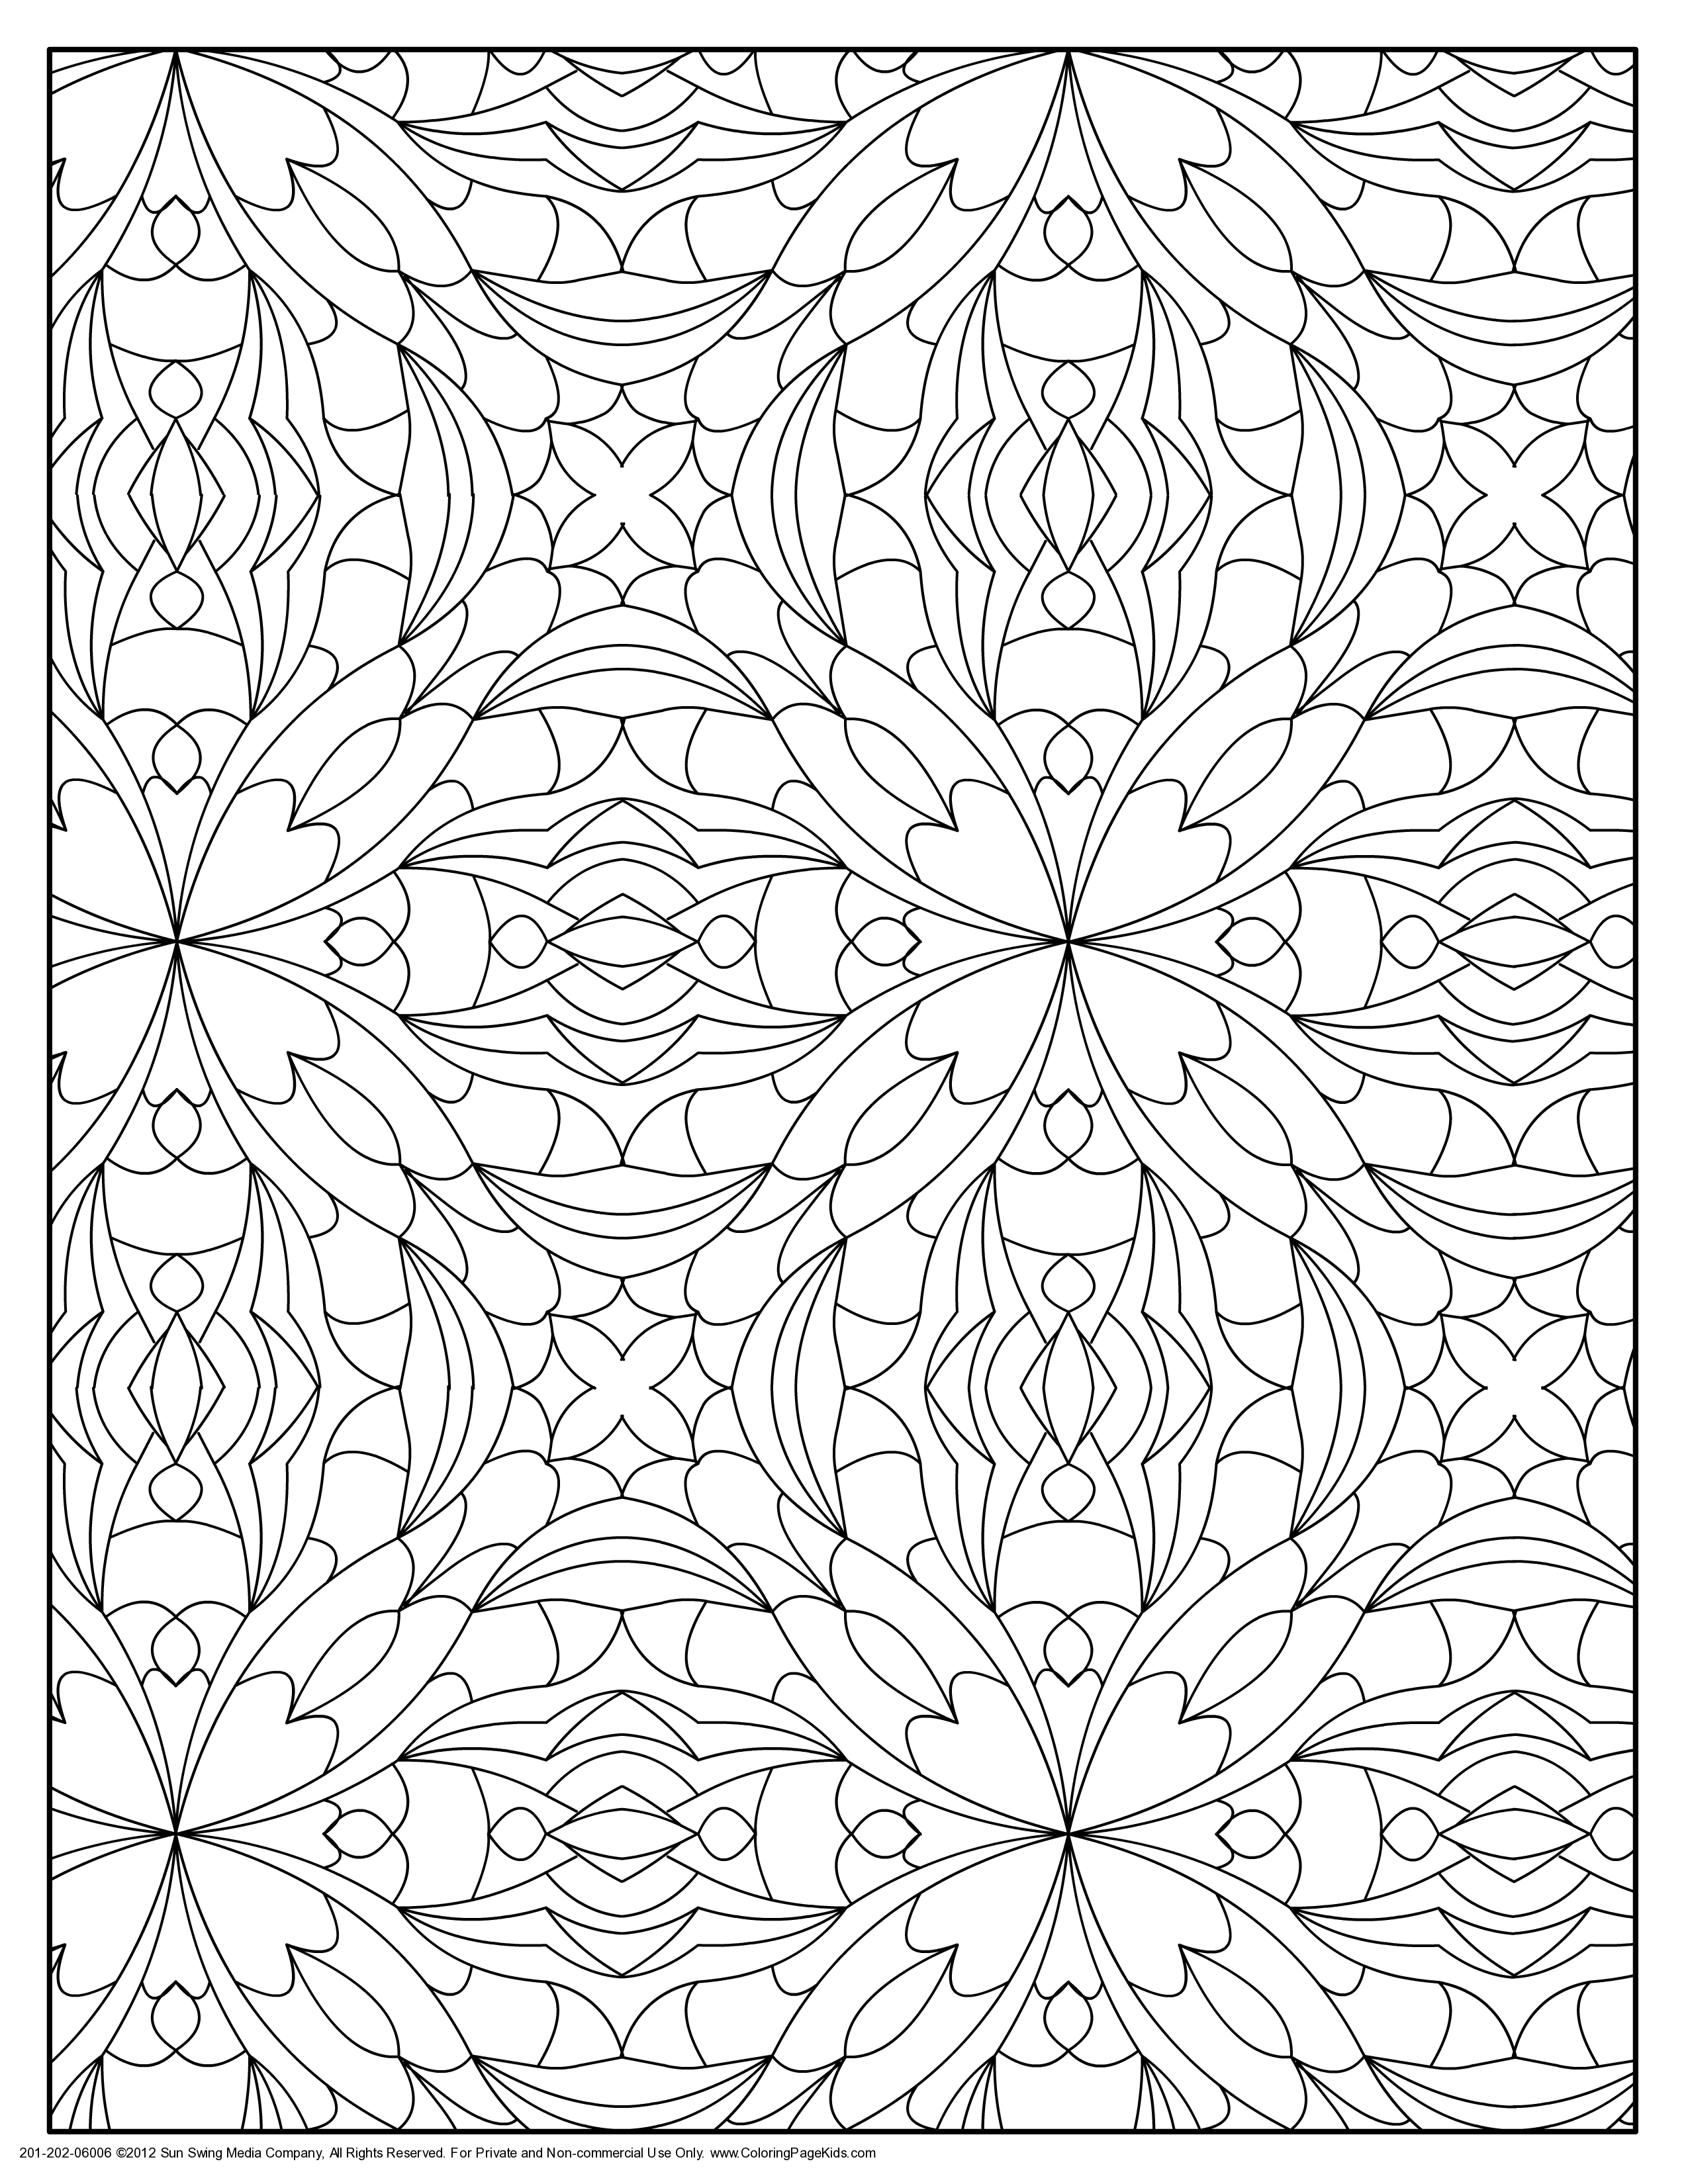 Printable coloring pages | Dover Publications ...